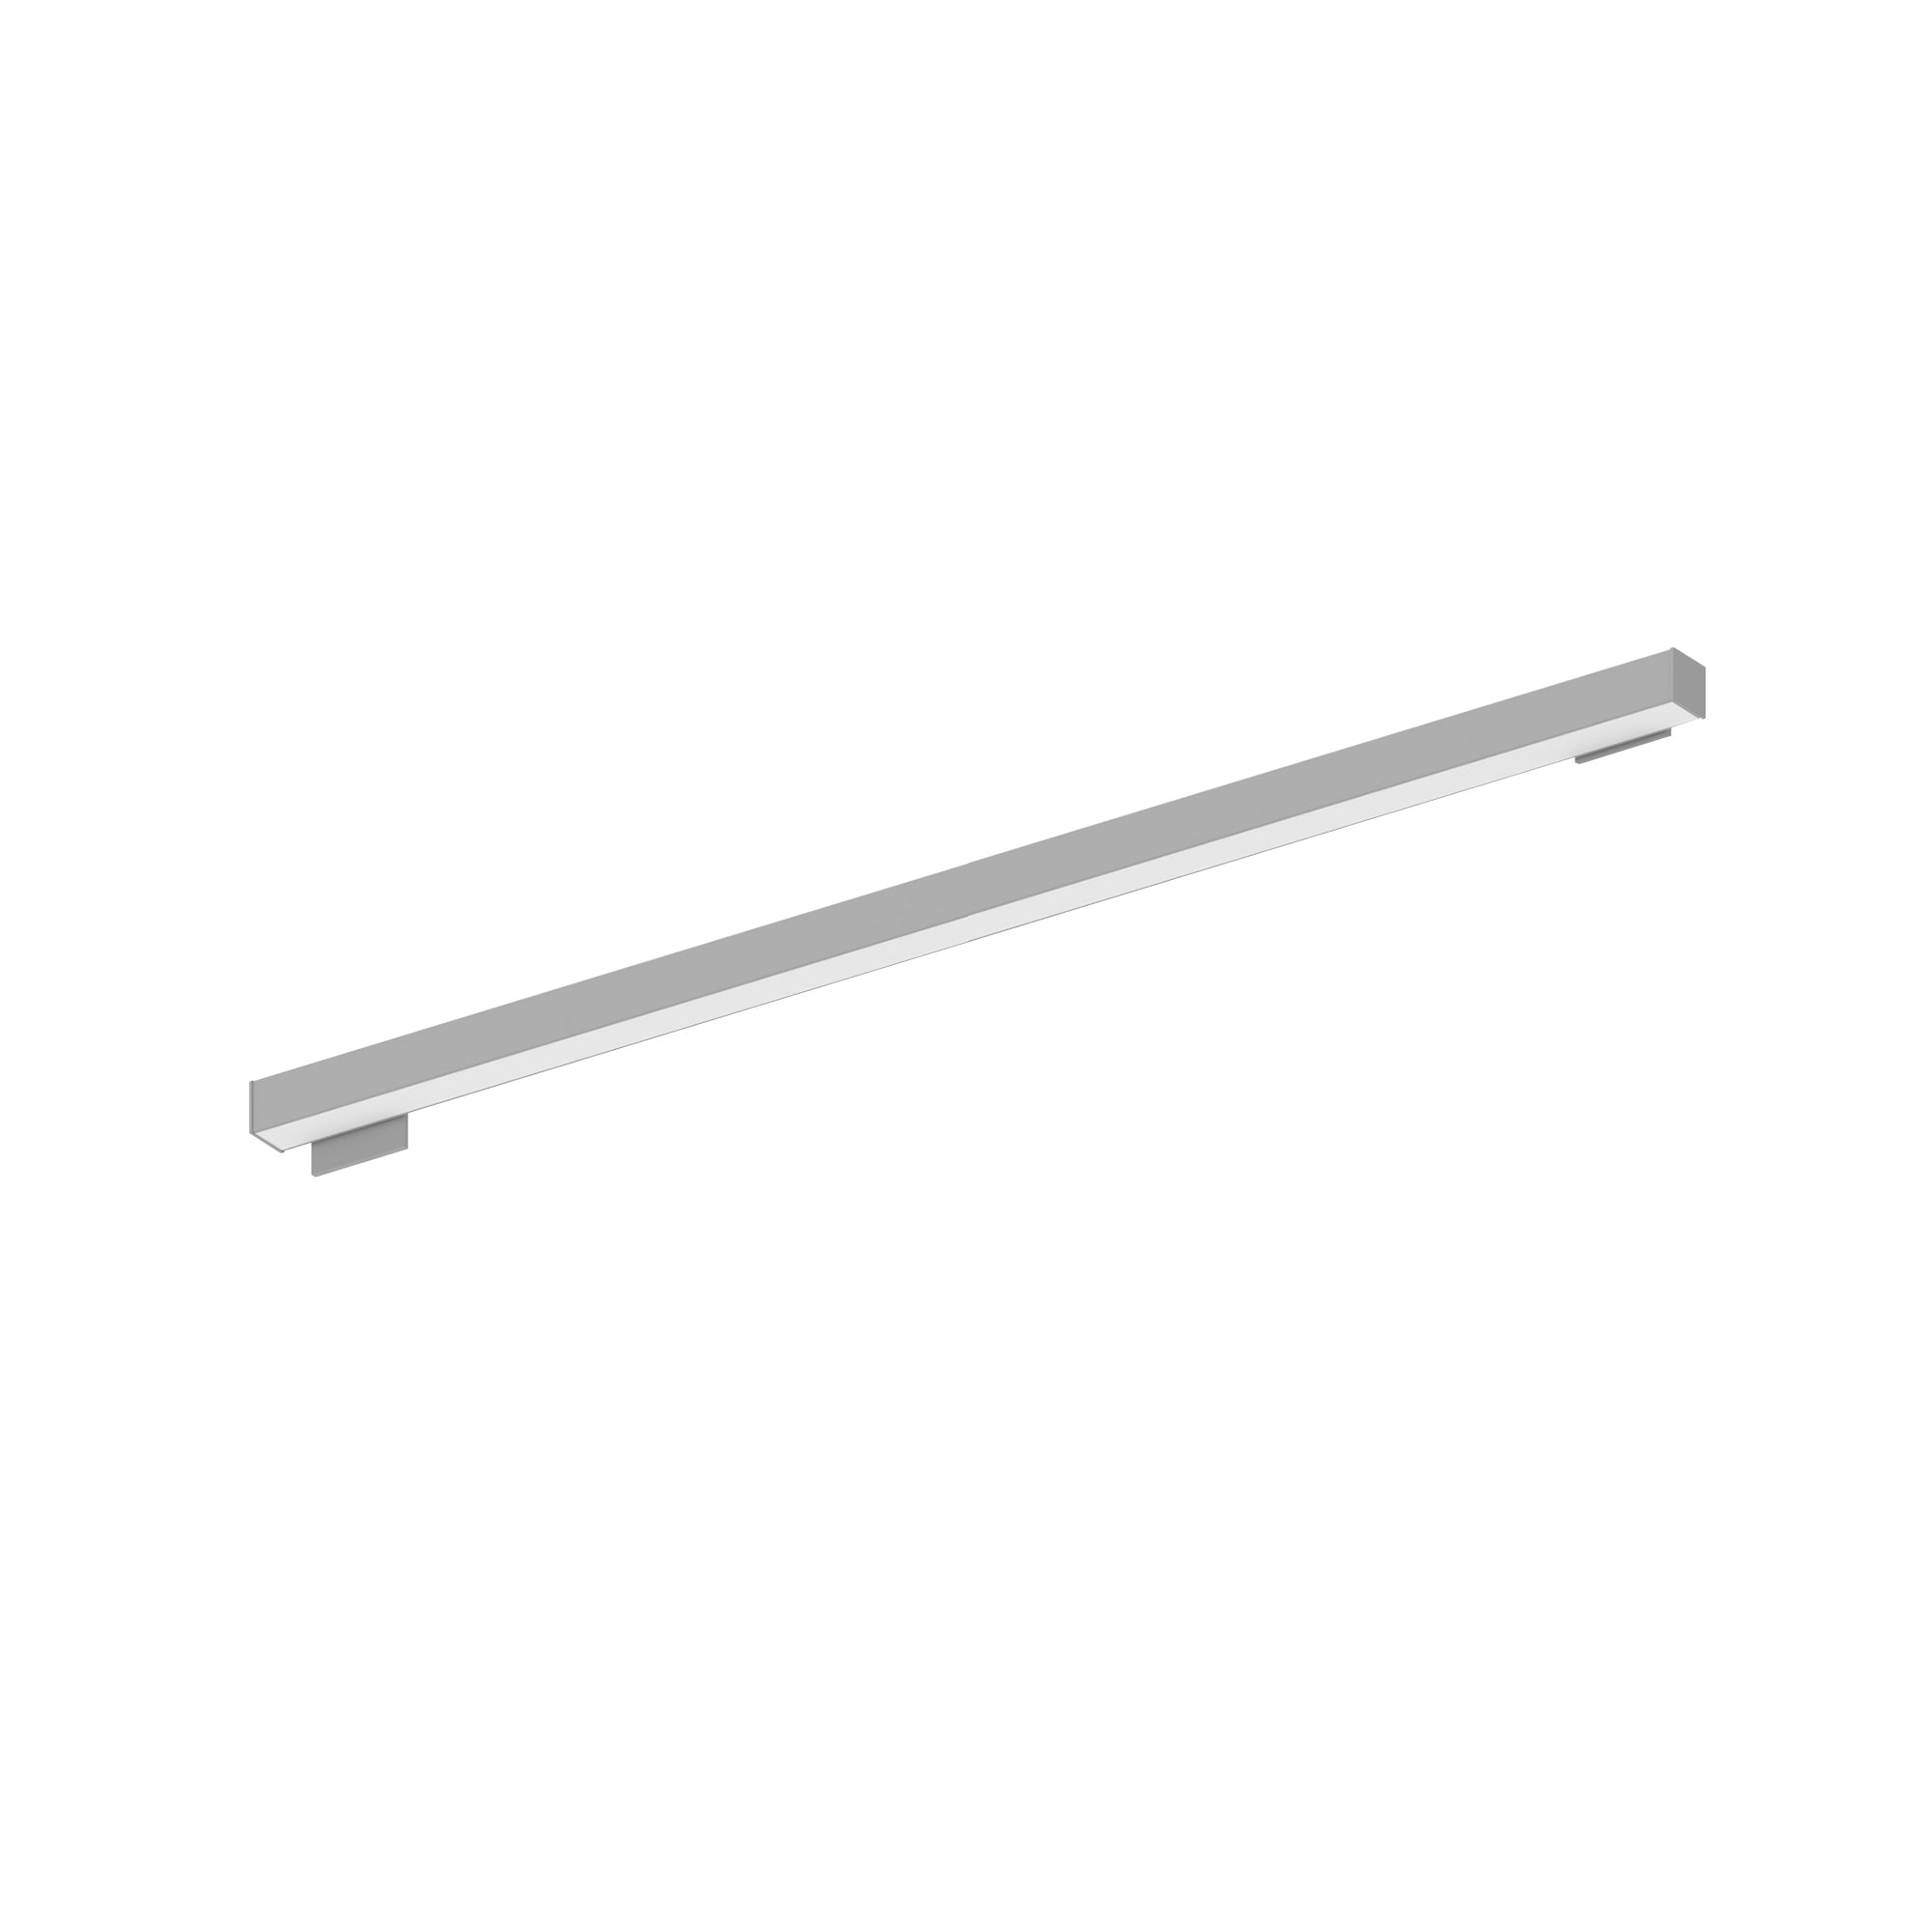 Nora Lighting NWLIN-81030A/L4P-R2 - Linear - 8' L-Line LED Wall Mount Linear, 8400lm / 3000K, 4 Inchx4 Inch Left Plate & 2 Inchx4 Inch Right Plate, Left Power Feed, Aluminum Finish